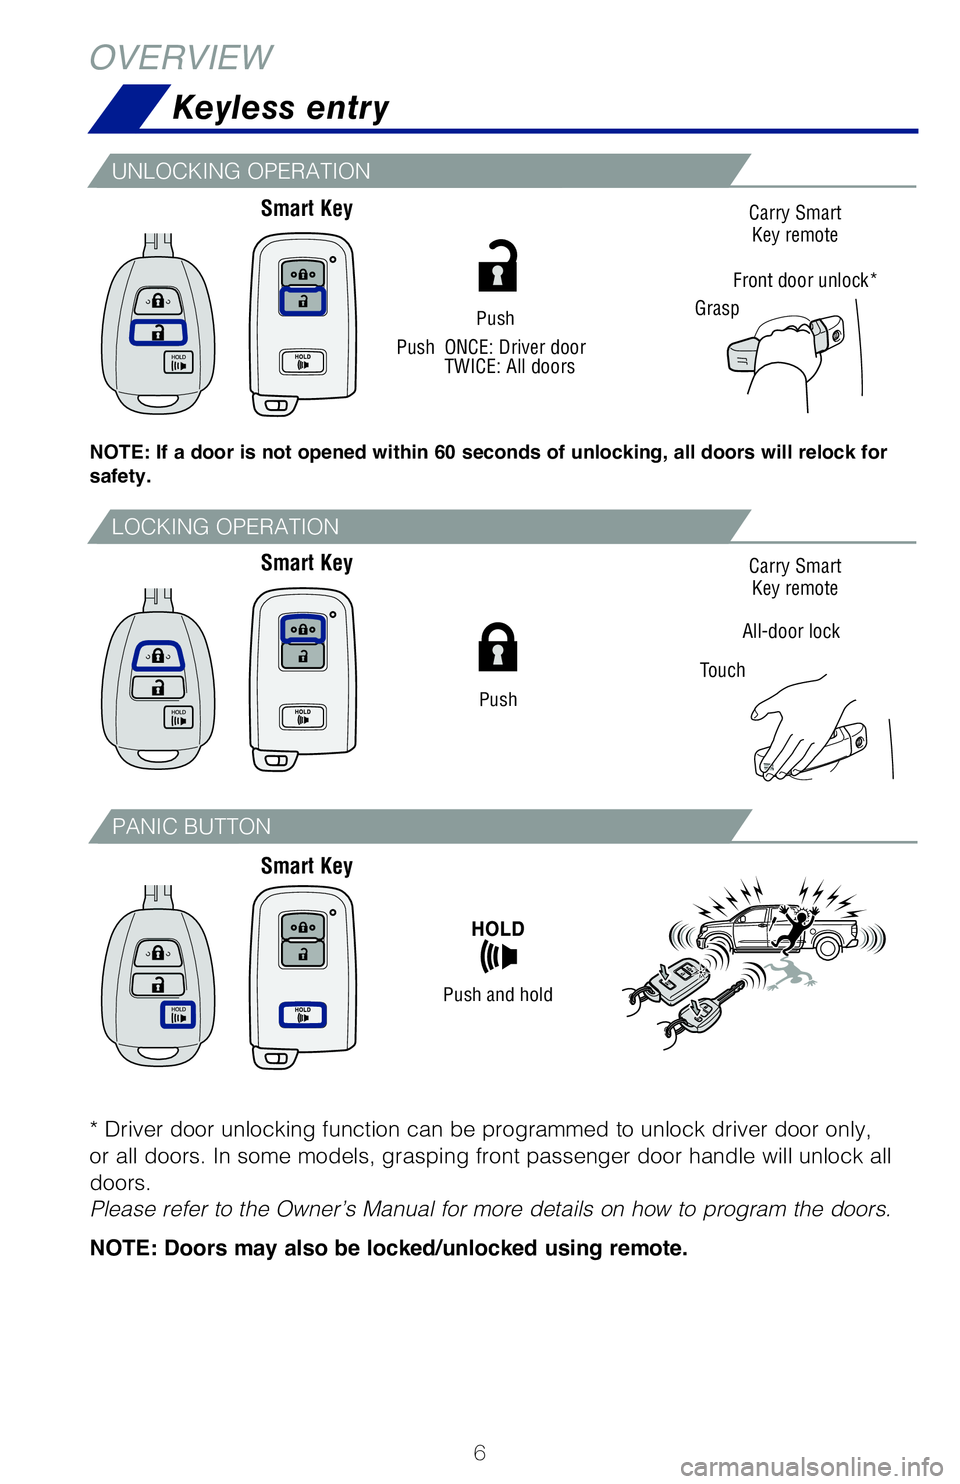 TOYOTA TUNDRA 2020  Owners Manual (in English) 6
Keyless entry
OVERVIEW
Push
UNLOCKING OPERATION
NOTE: If a door is not opened within 60 seconds of unlocking, all doors will relock for  safety.
Push
LOCKING OPERATION
Push and hold
PANIC BUTTON
Sma